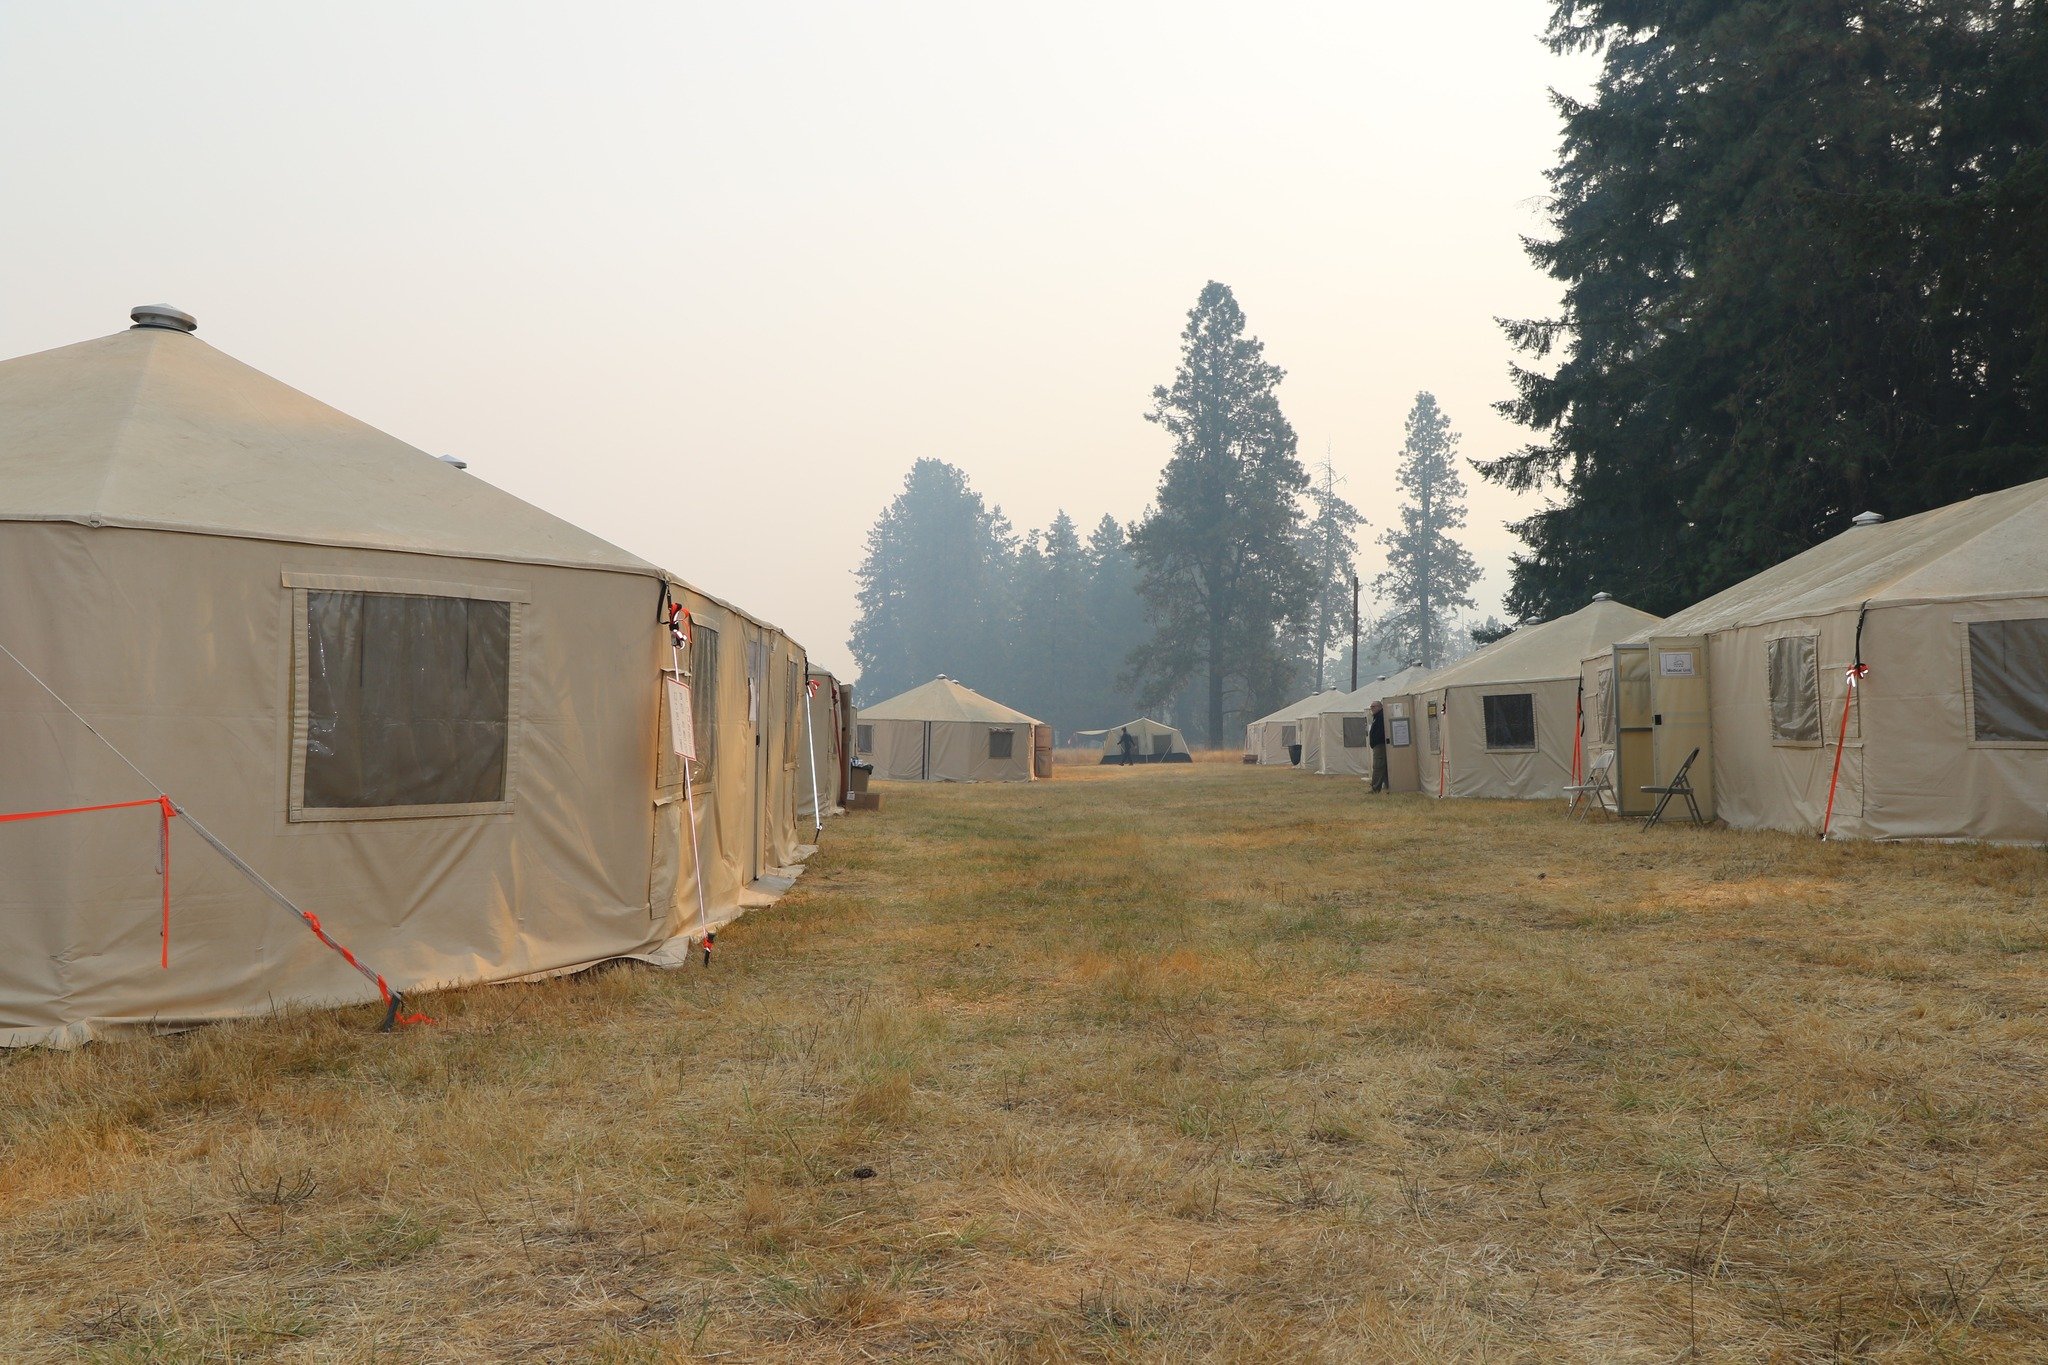 From command centers to comfortable living quarters, Western Shelter offers everything you need to create a successful fire camp. 🫡

We've been supporting wildland firefighters for 30 years, providing a complete solution for their comfort and focus.